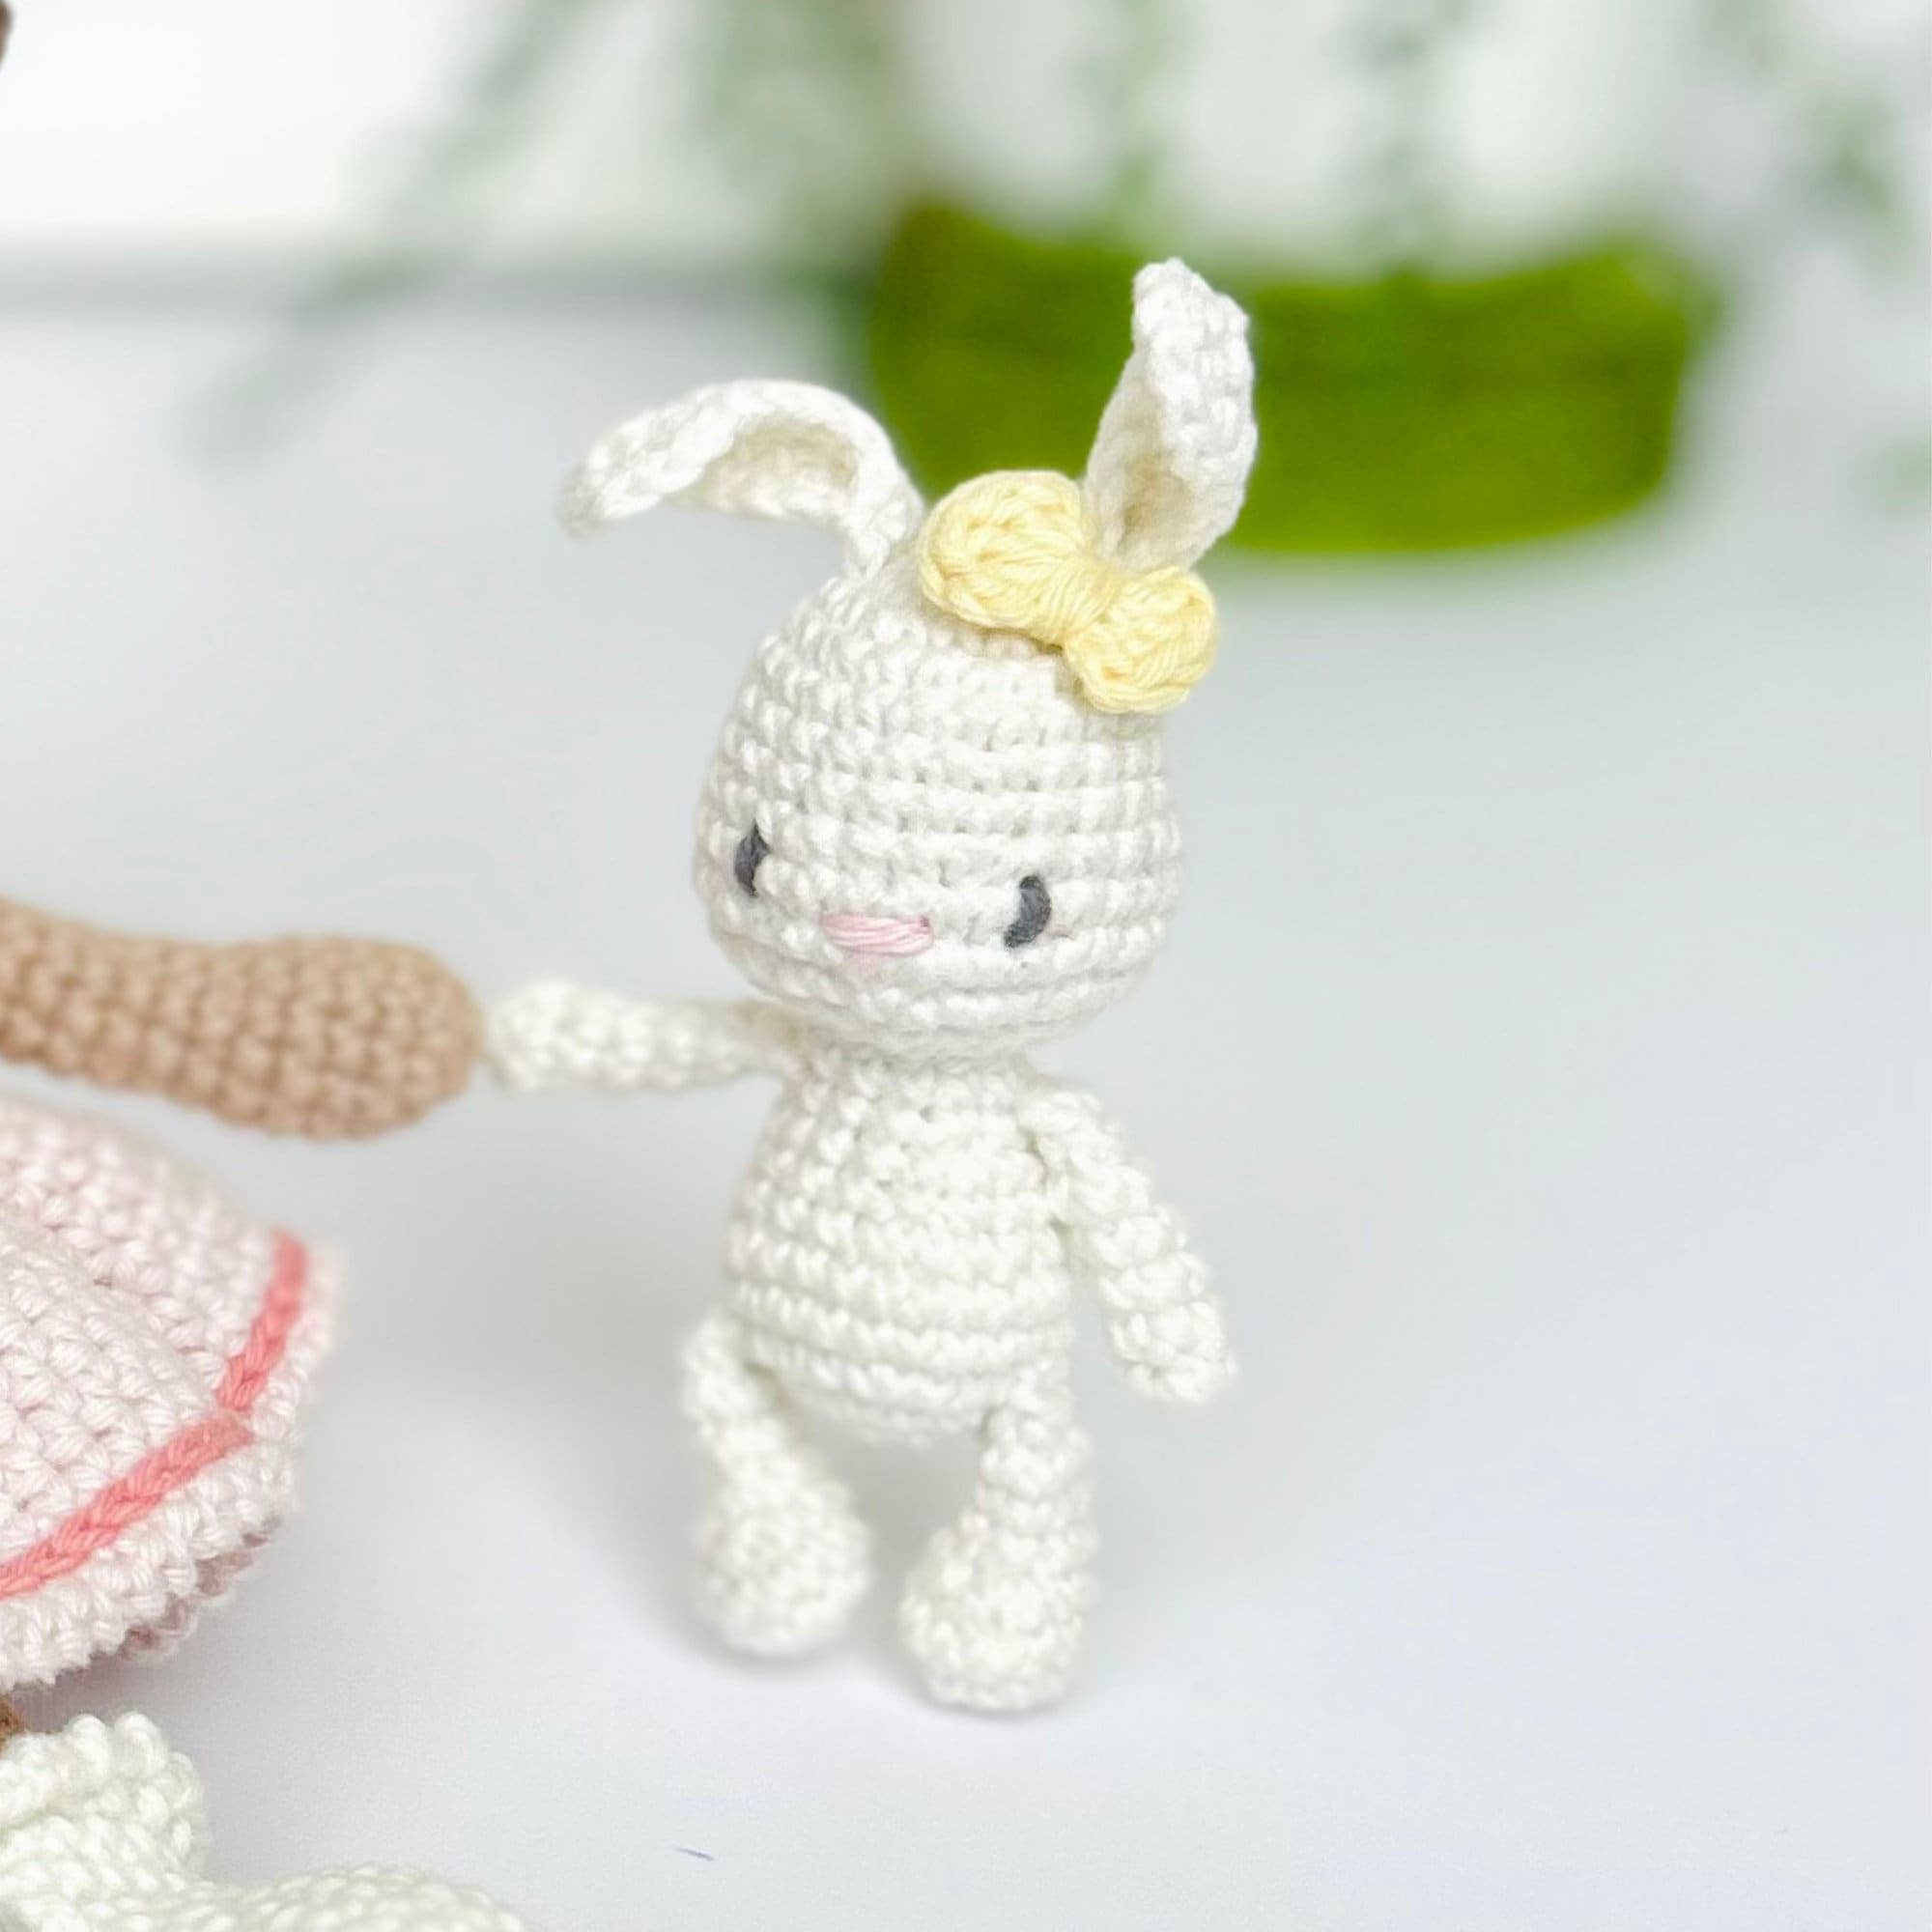 Basic Body Doll Cochet Pattern - Amigurumi Doll Pattern - RicyChan's Ko-fi  Shop - Ko-fi ❤️ Where creators get support from fans through donations,  memberships, shop sales and more! The original 'Buy